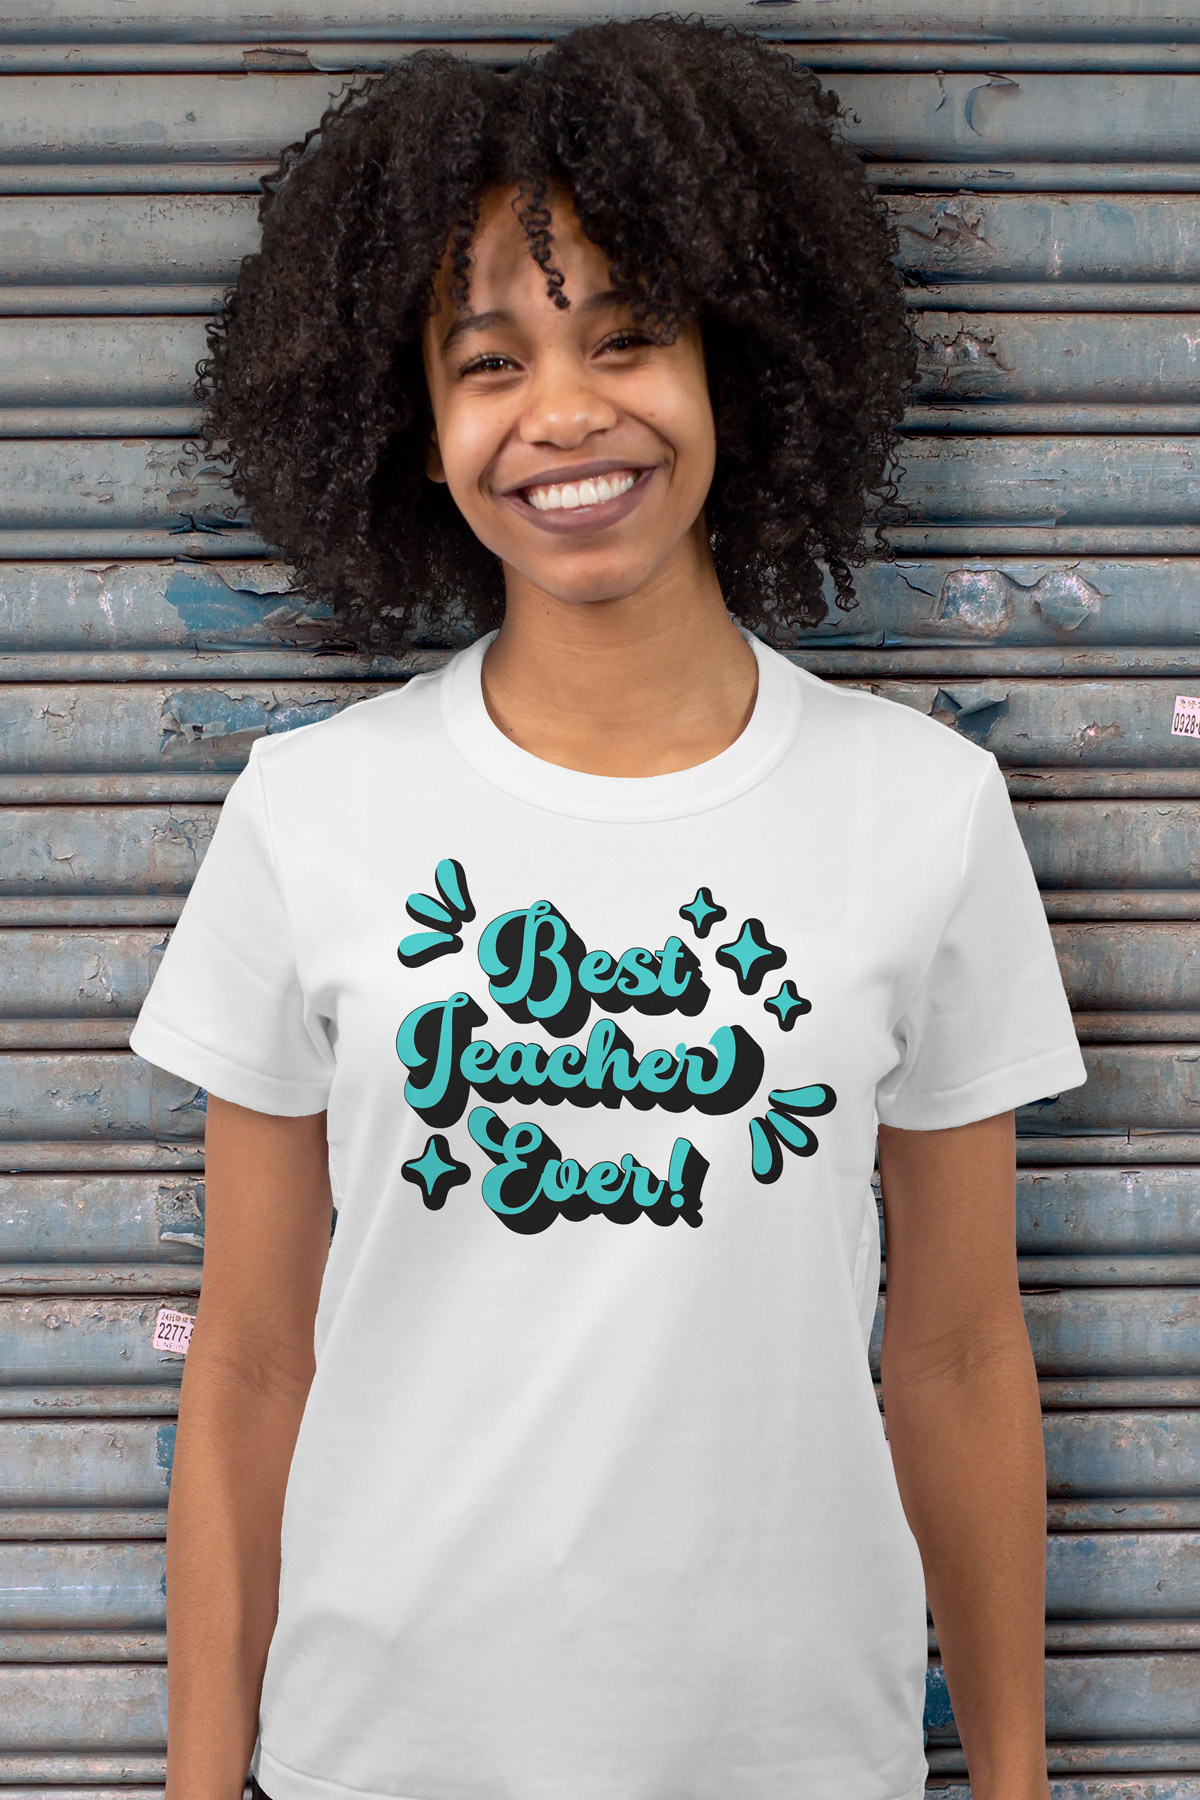 This image shows a woman wearing a shirt that says best teacher ever. It is the best teacher svg free file you can get in this post.